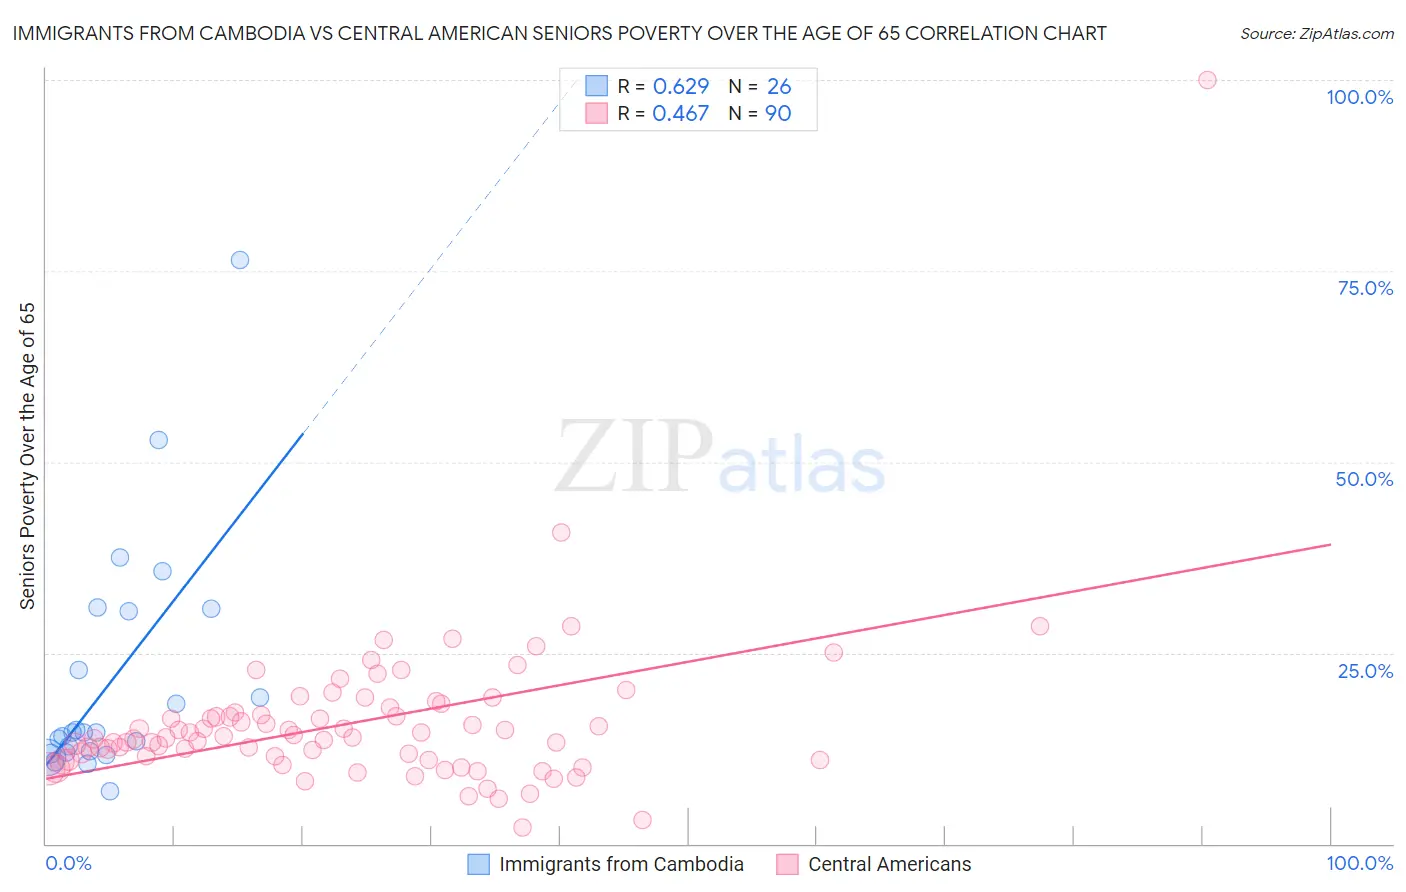 Immigrants from Cambodia vs Central American Seniors Poverty Over the Age of 65